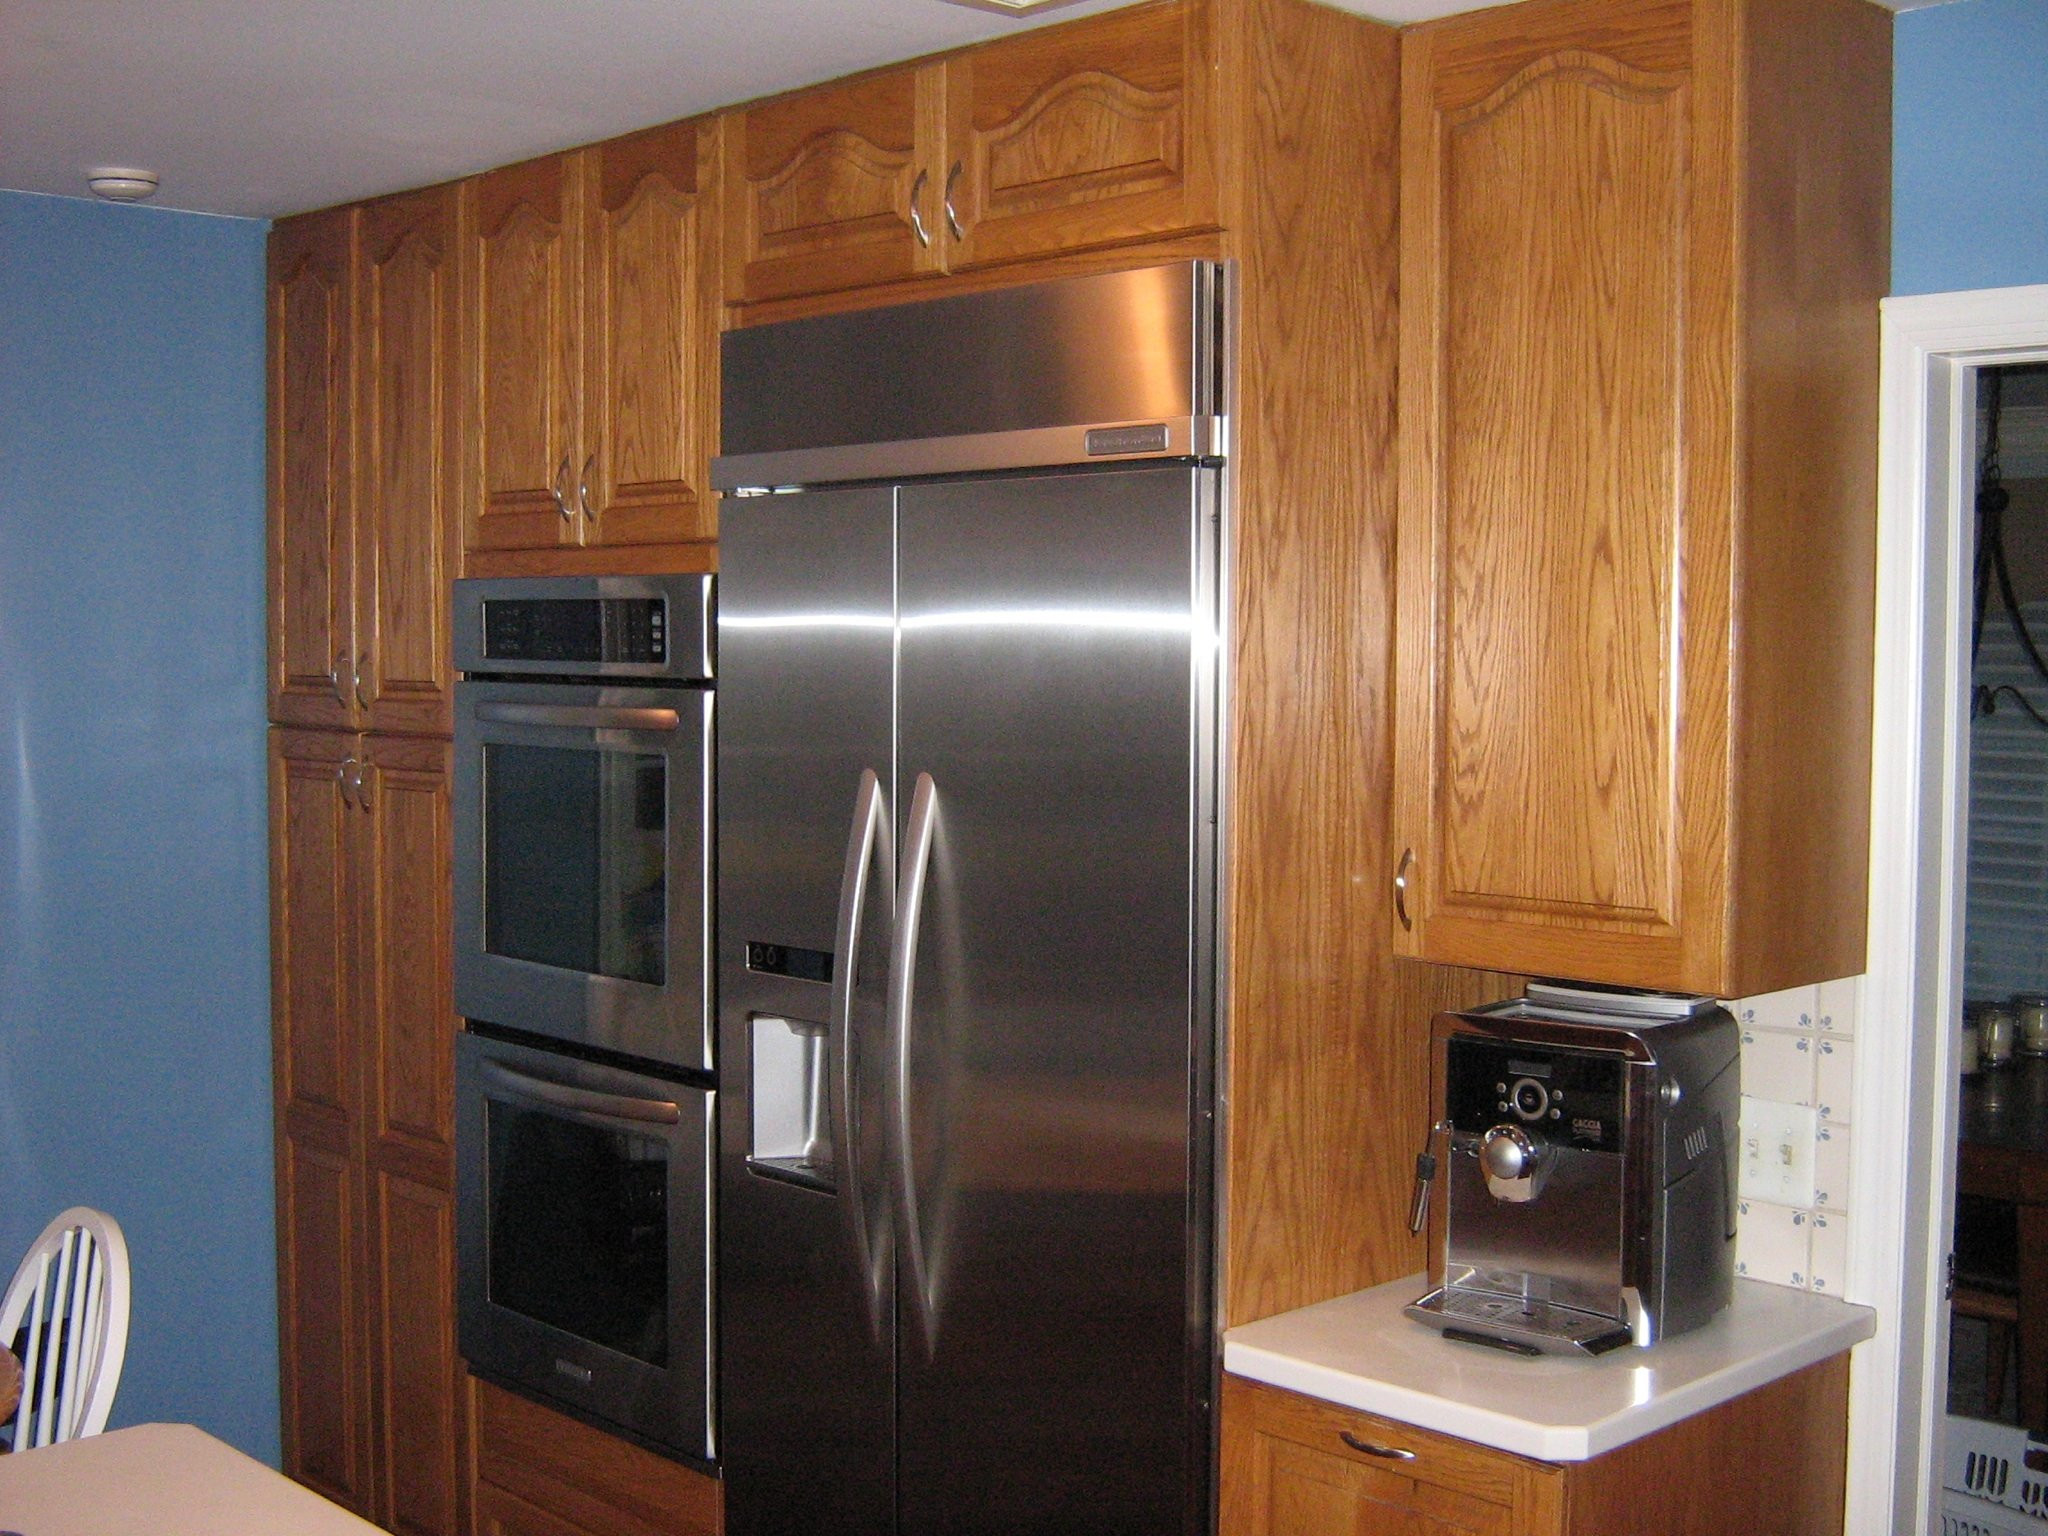 Floor To Ceiling Cabinets Bedroom
 Living Light 4 Kitchen Space Savers for When You Just Don